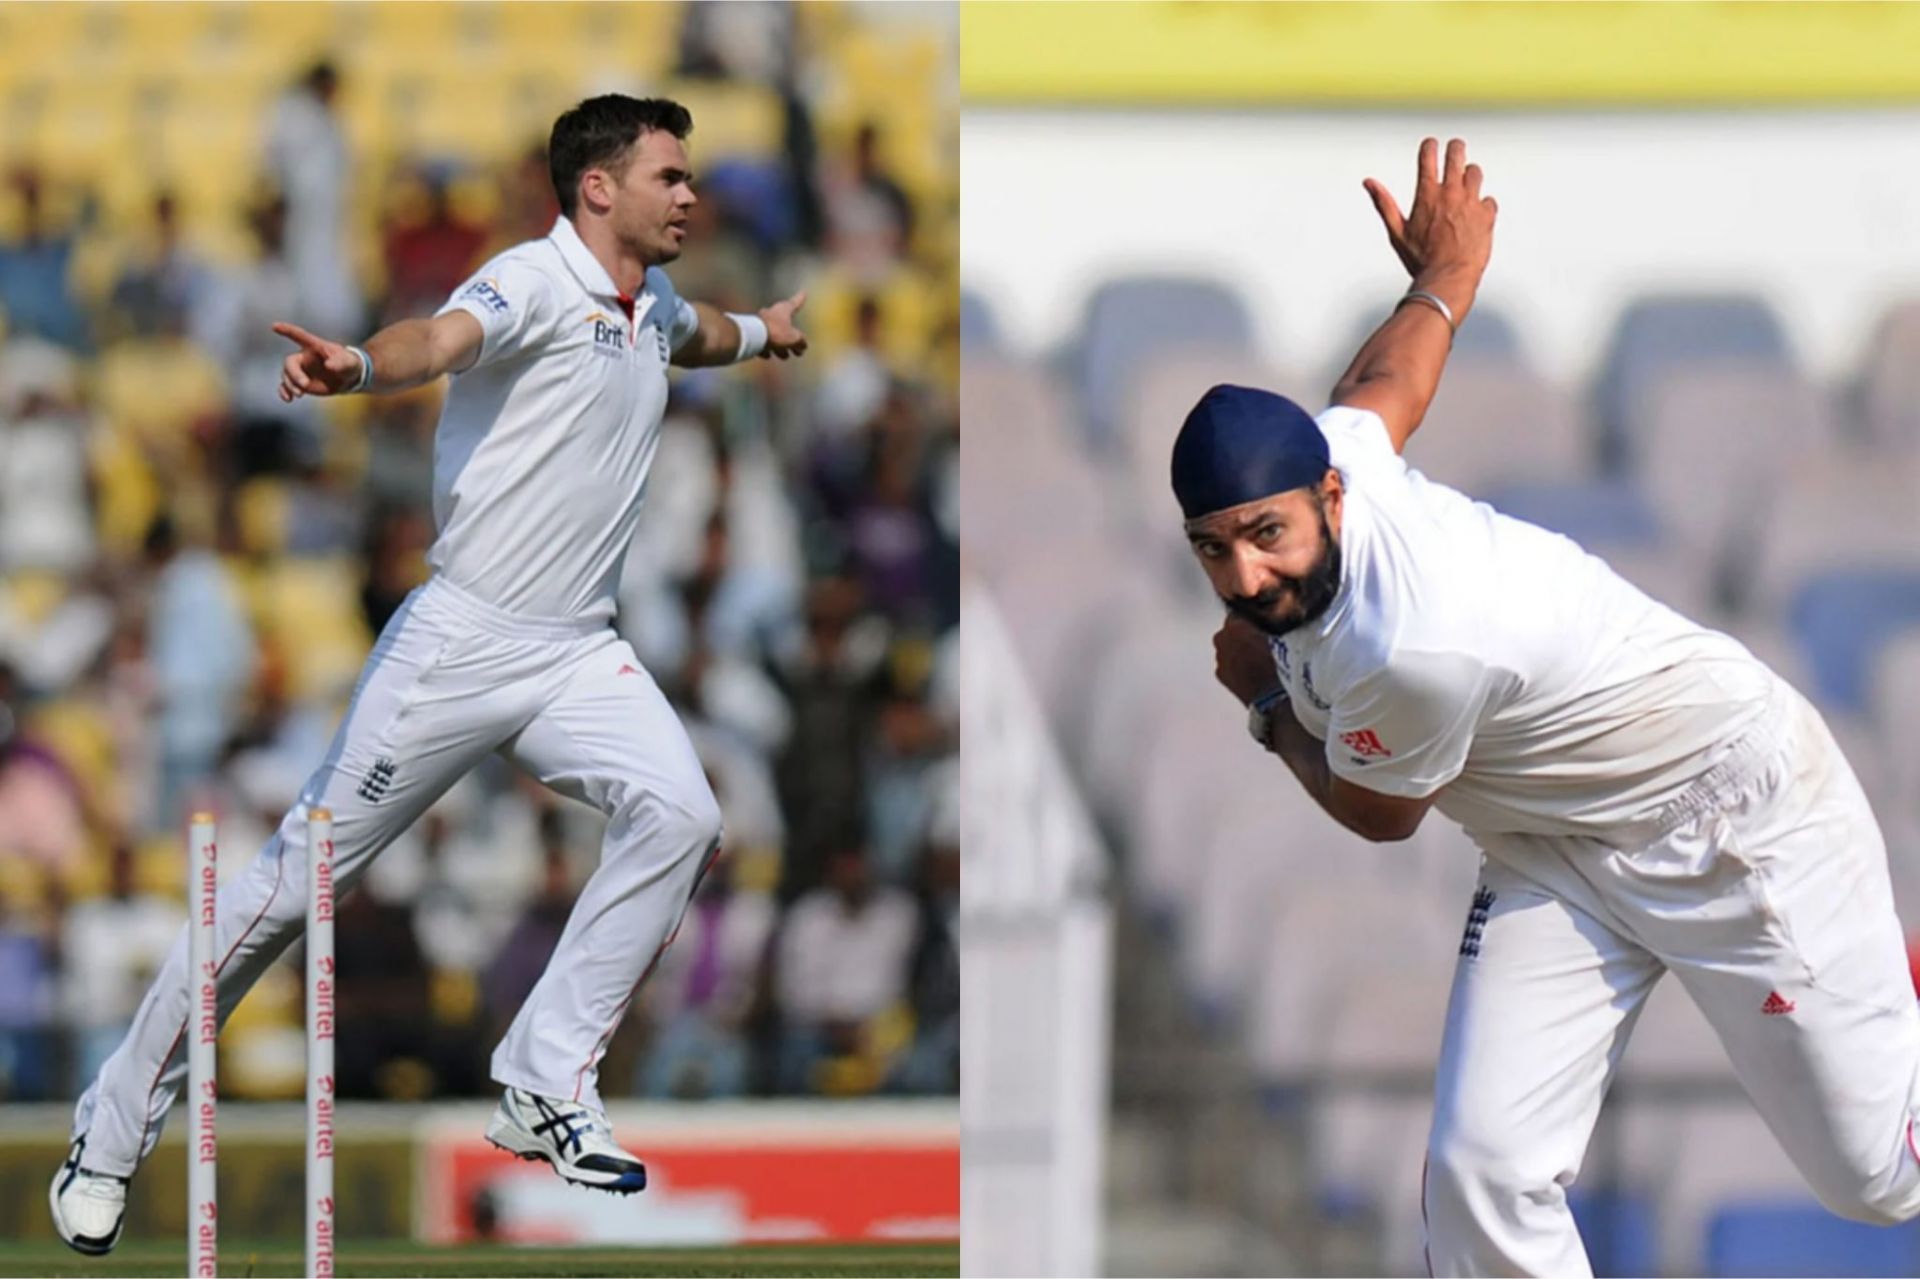 James Anderson (L) and Monty Panesar (R) [Getty Images]